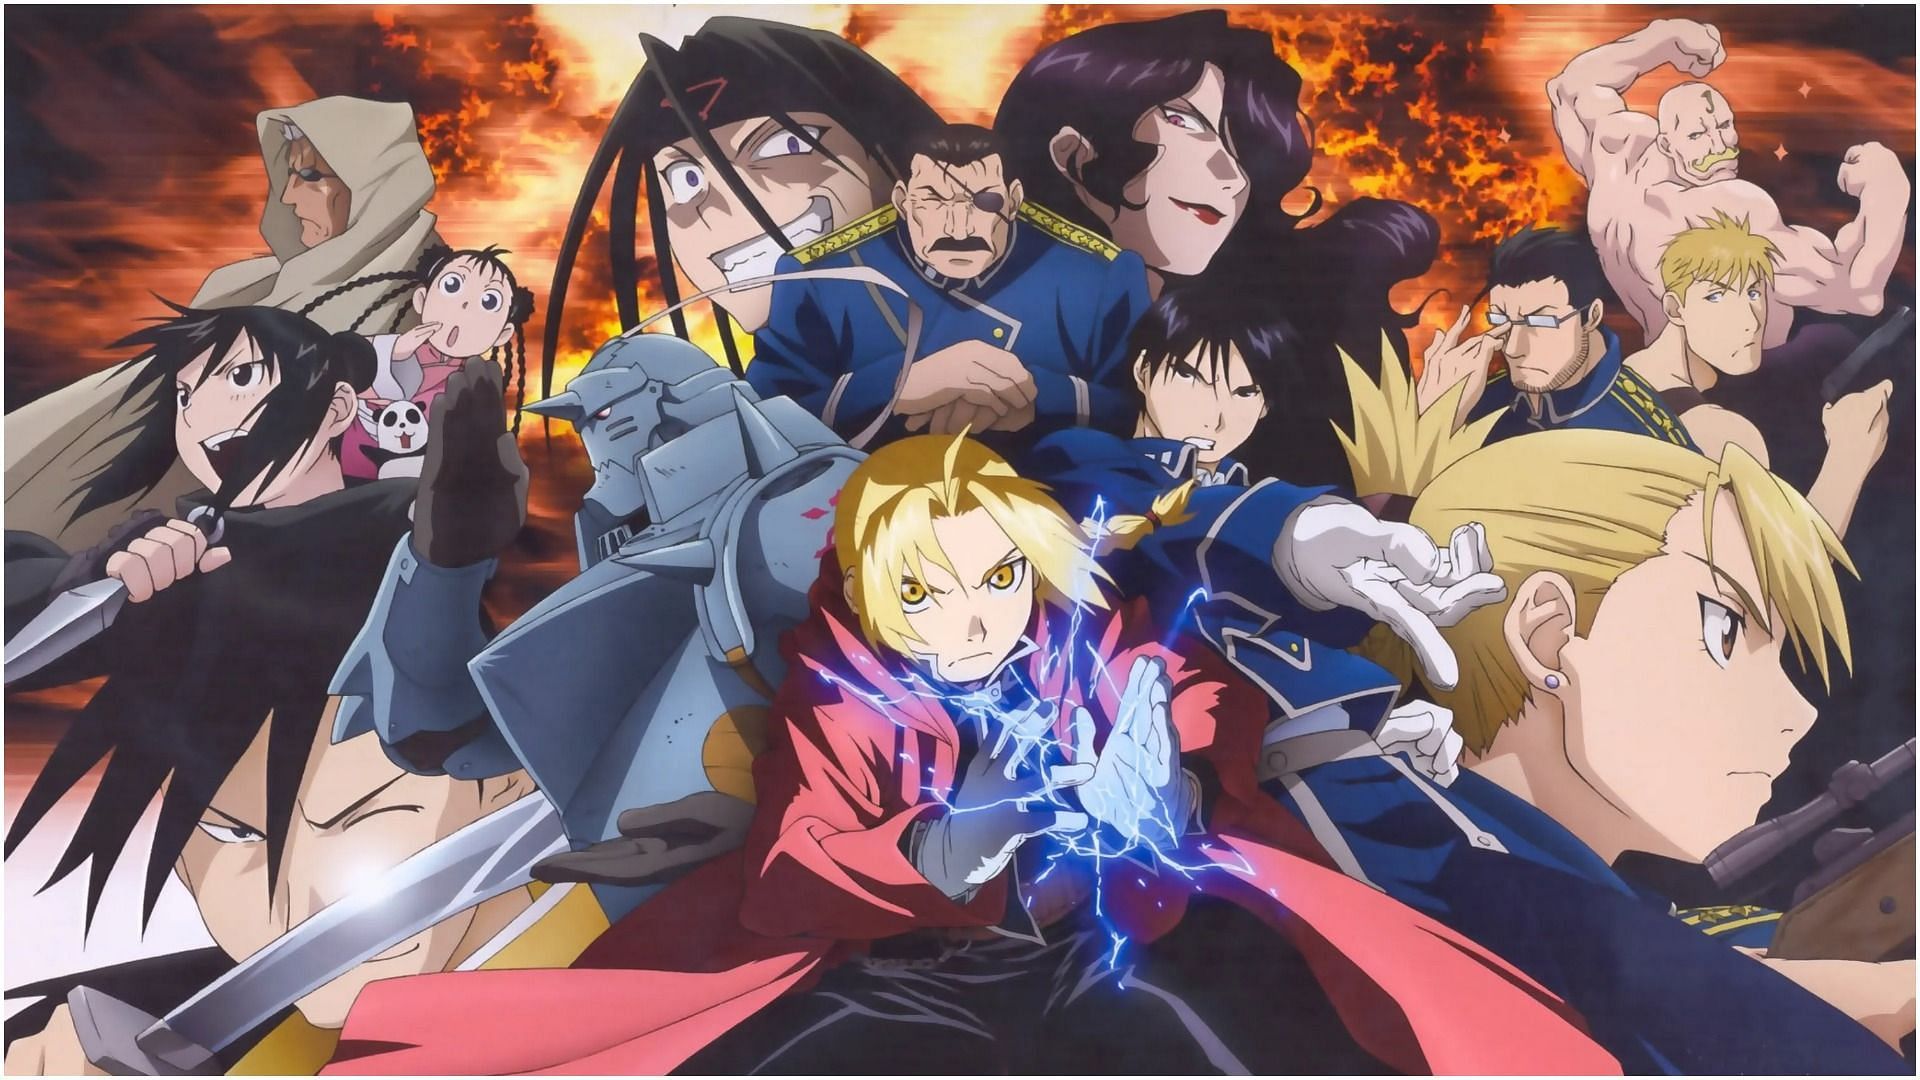 How to watch Fullmetal Alchemist and Brotherhood in order